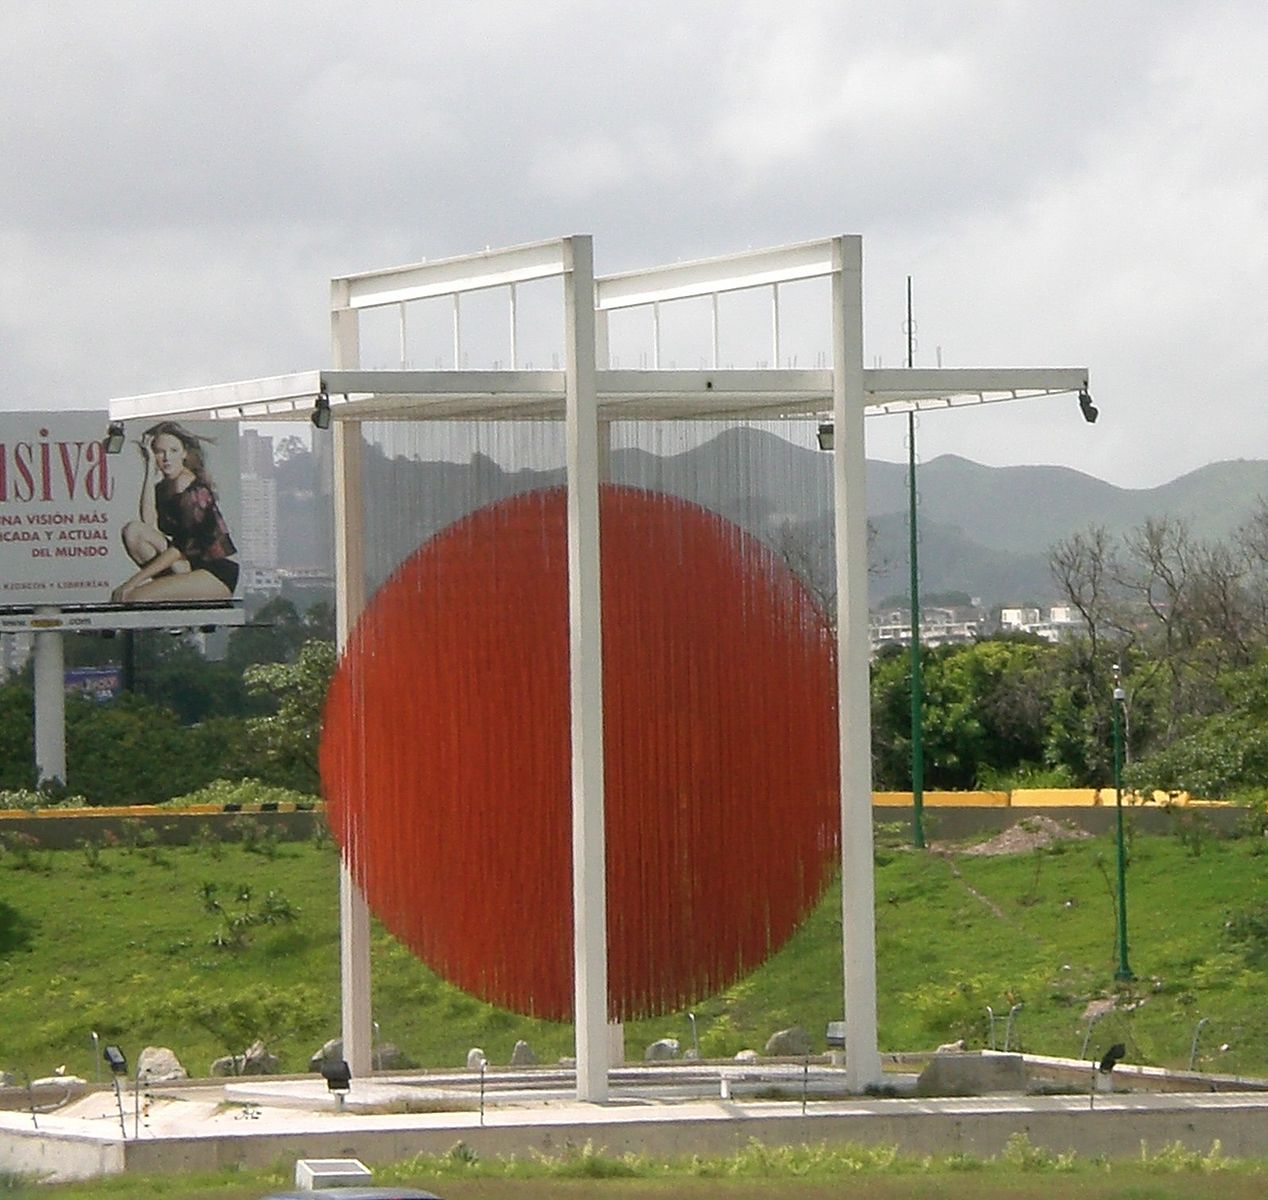 A large metal sculpture shaped in a box with a circle of red rods hanging